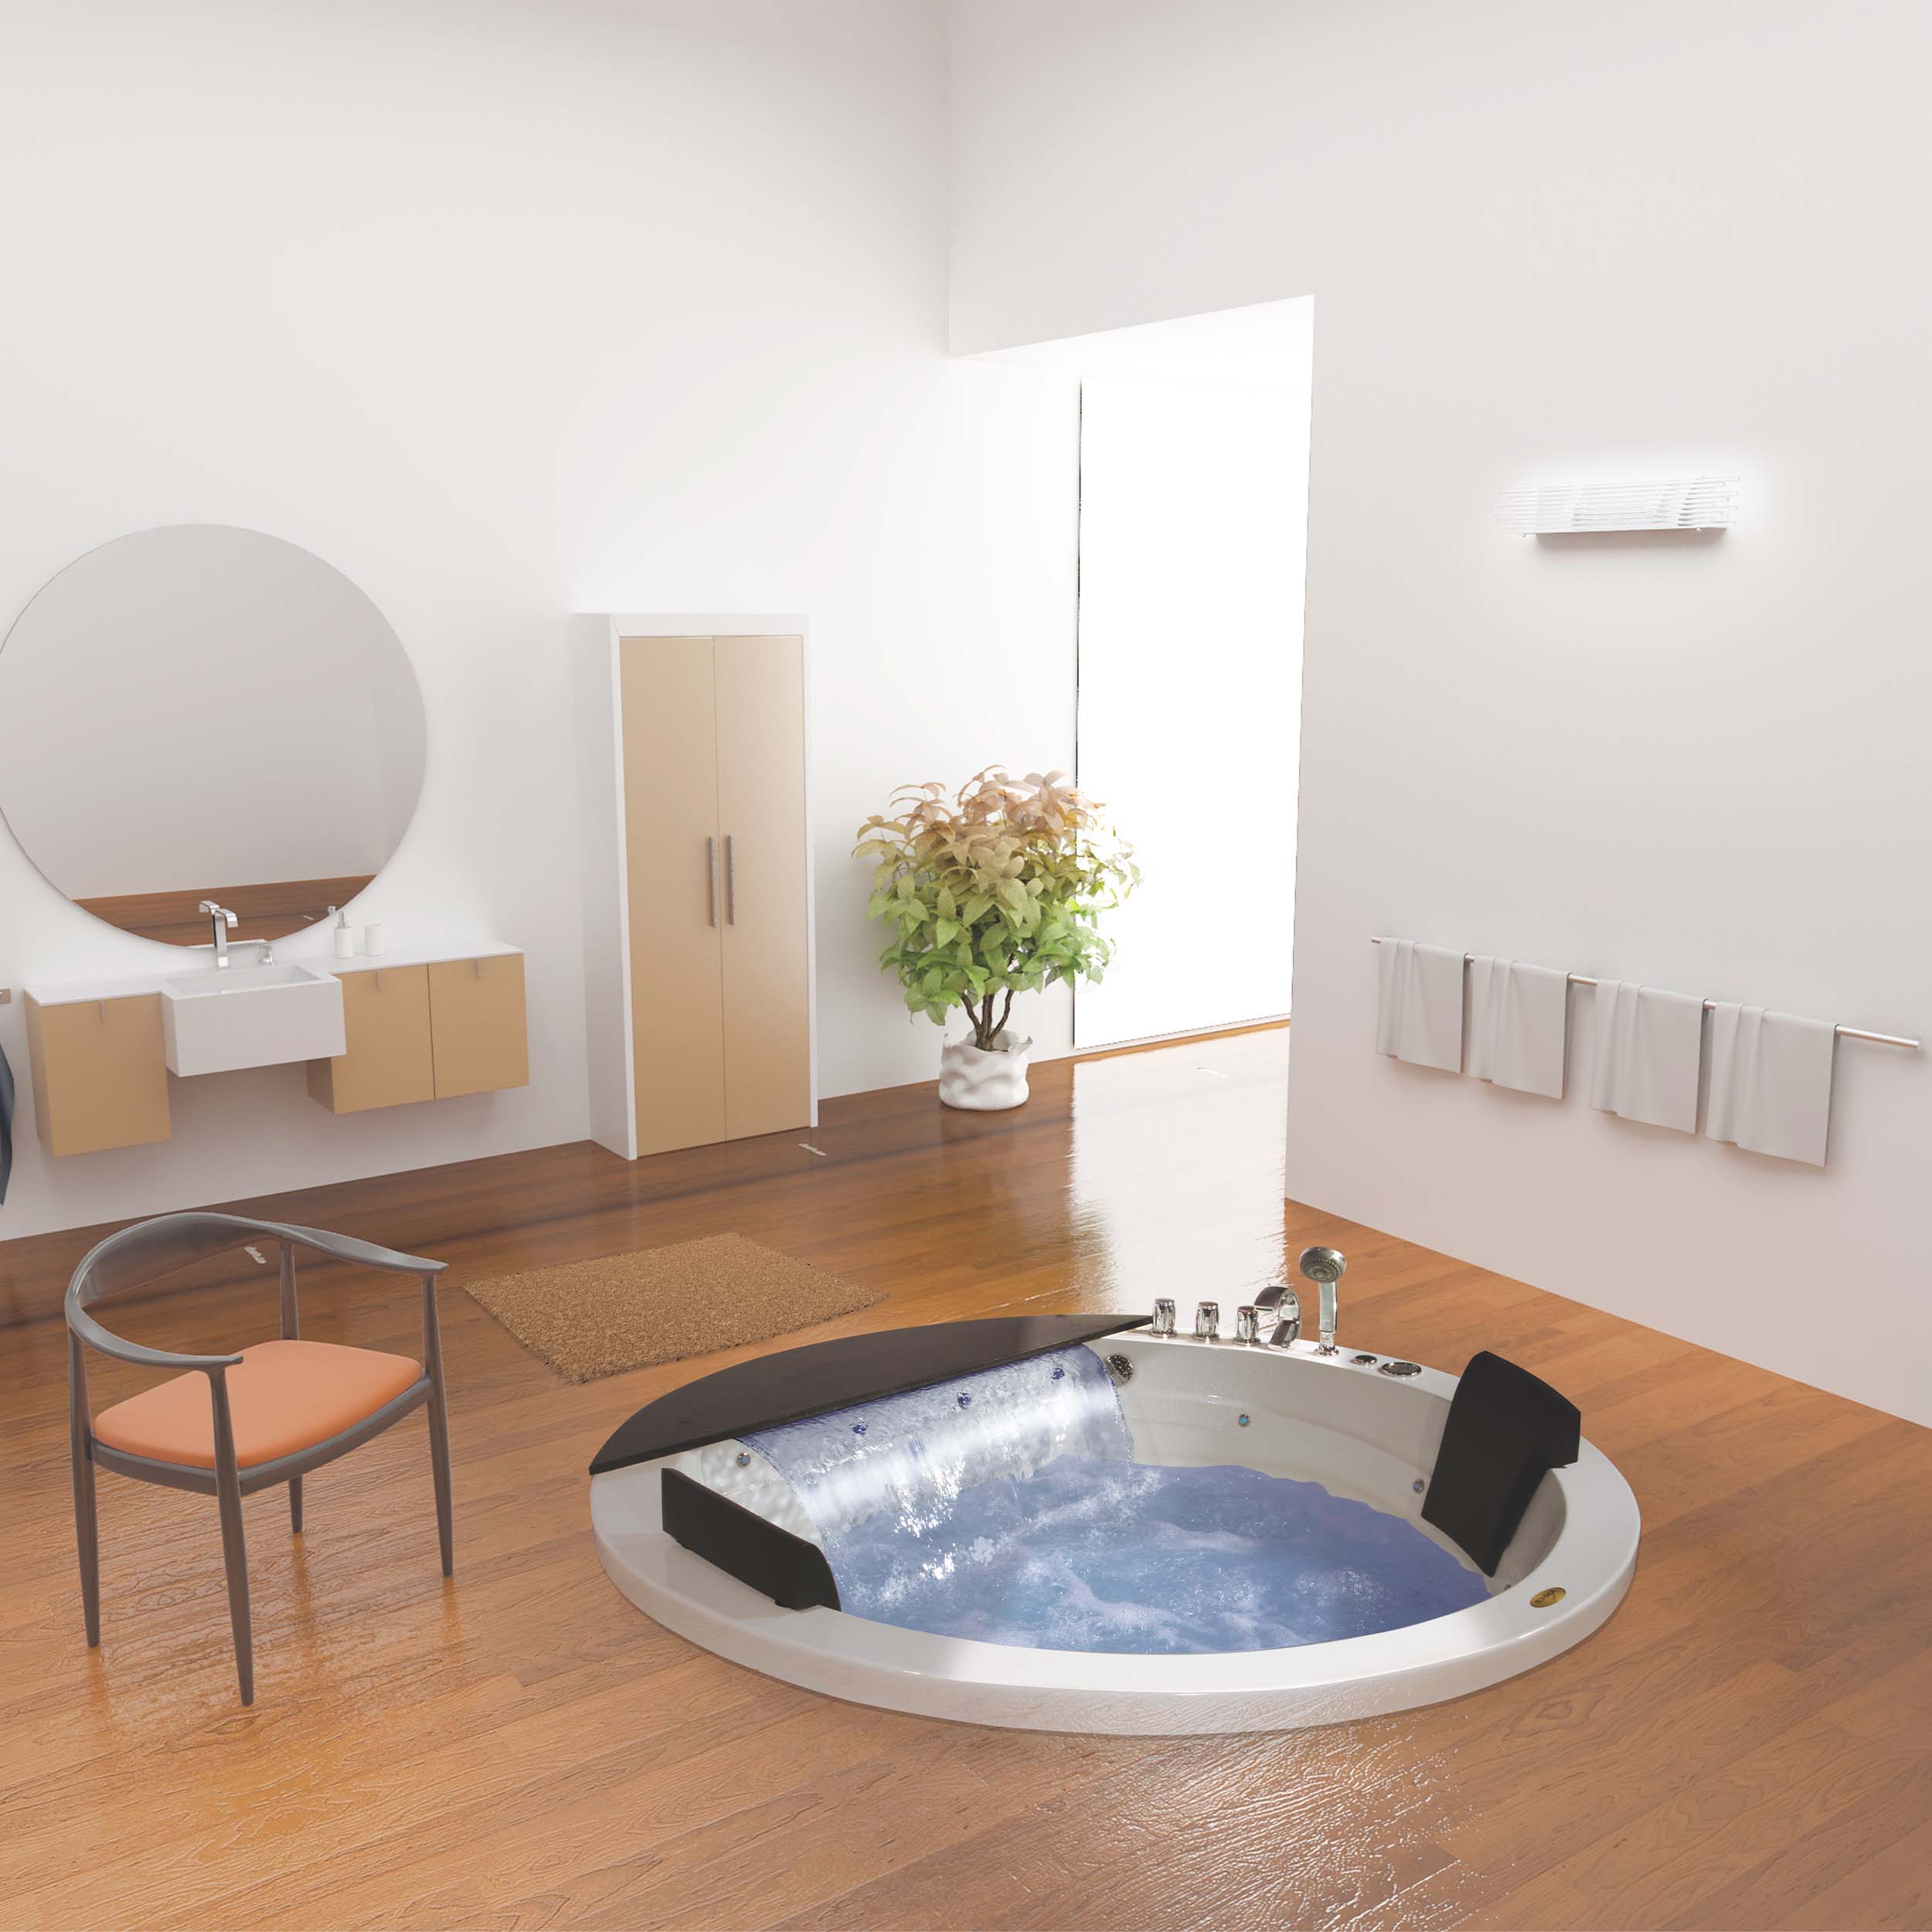 Read more about the article Importance Of Bathtubs: Add More Leisure To Your Bathroom